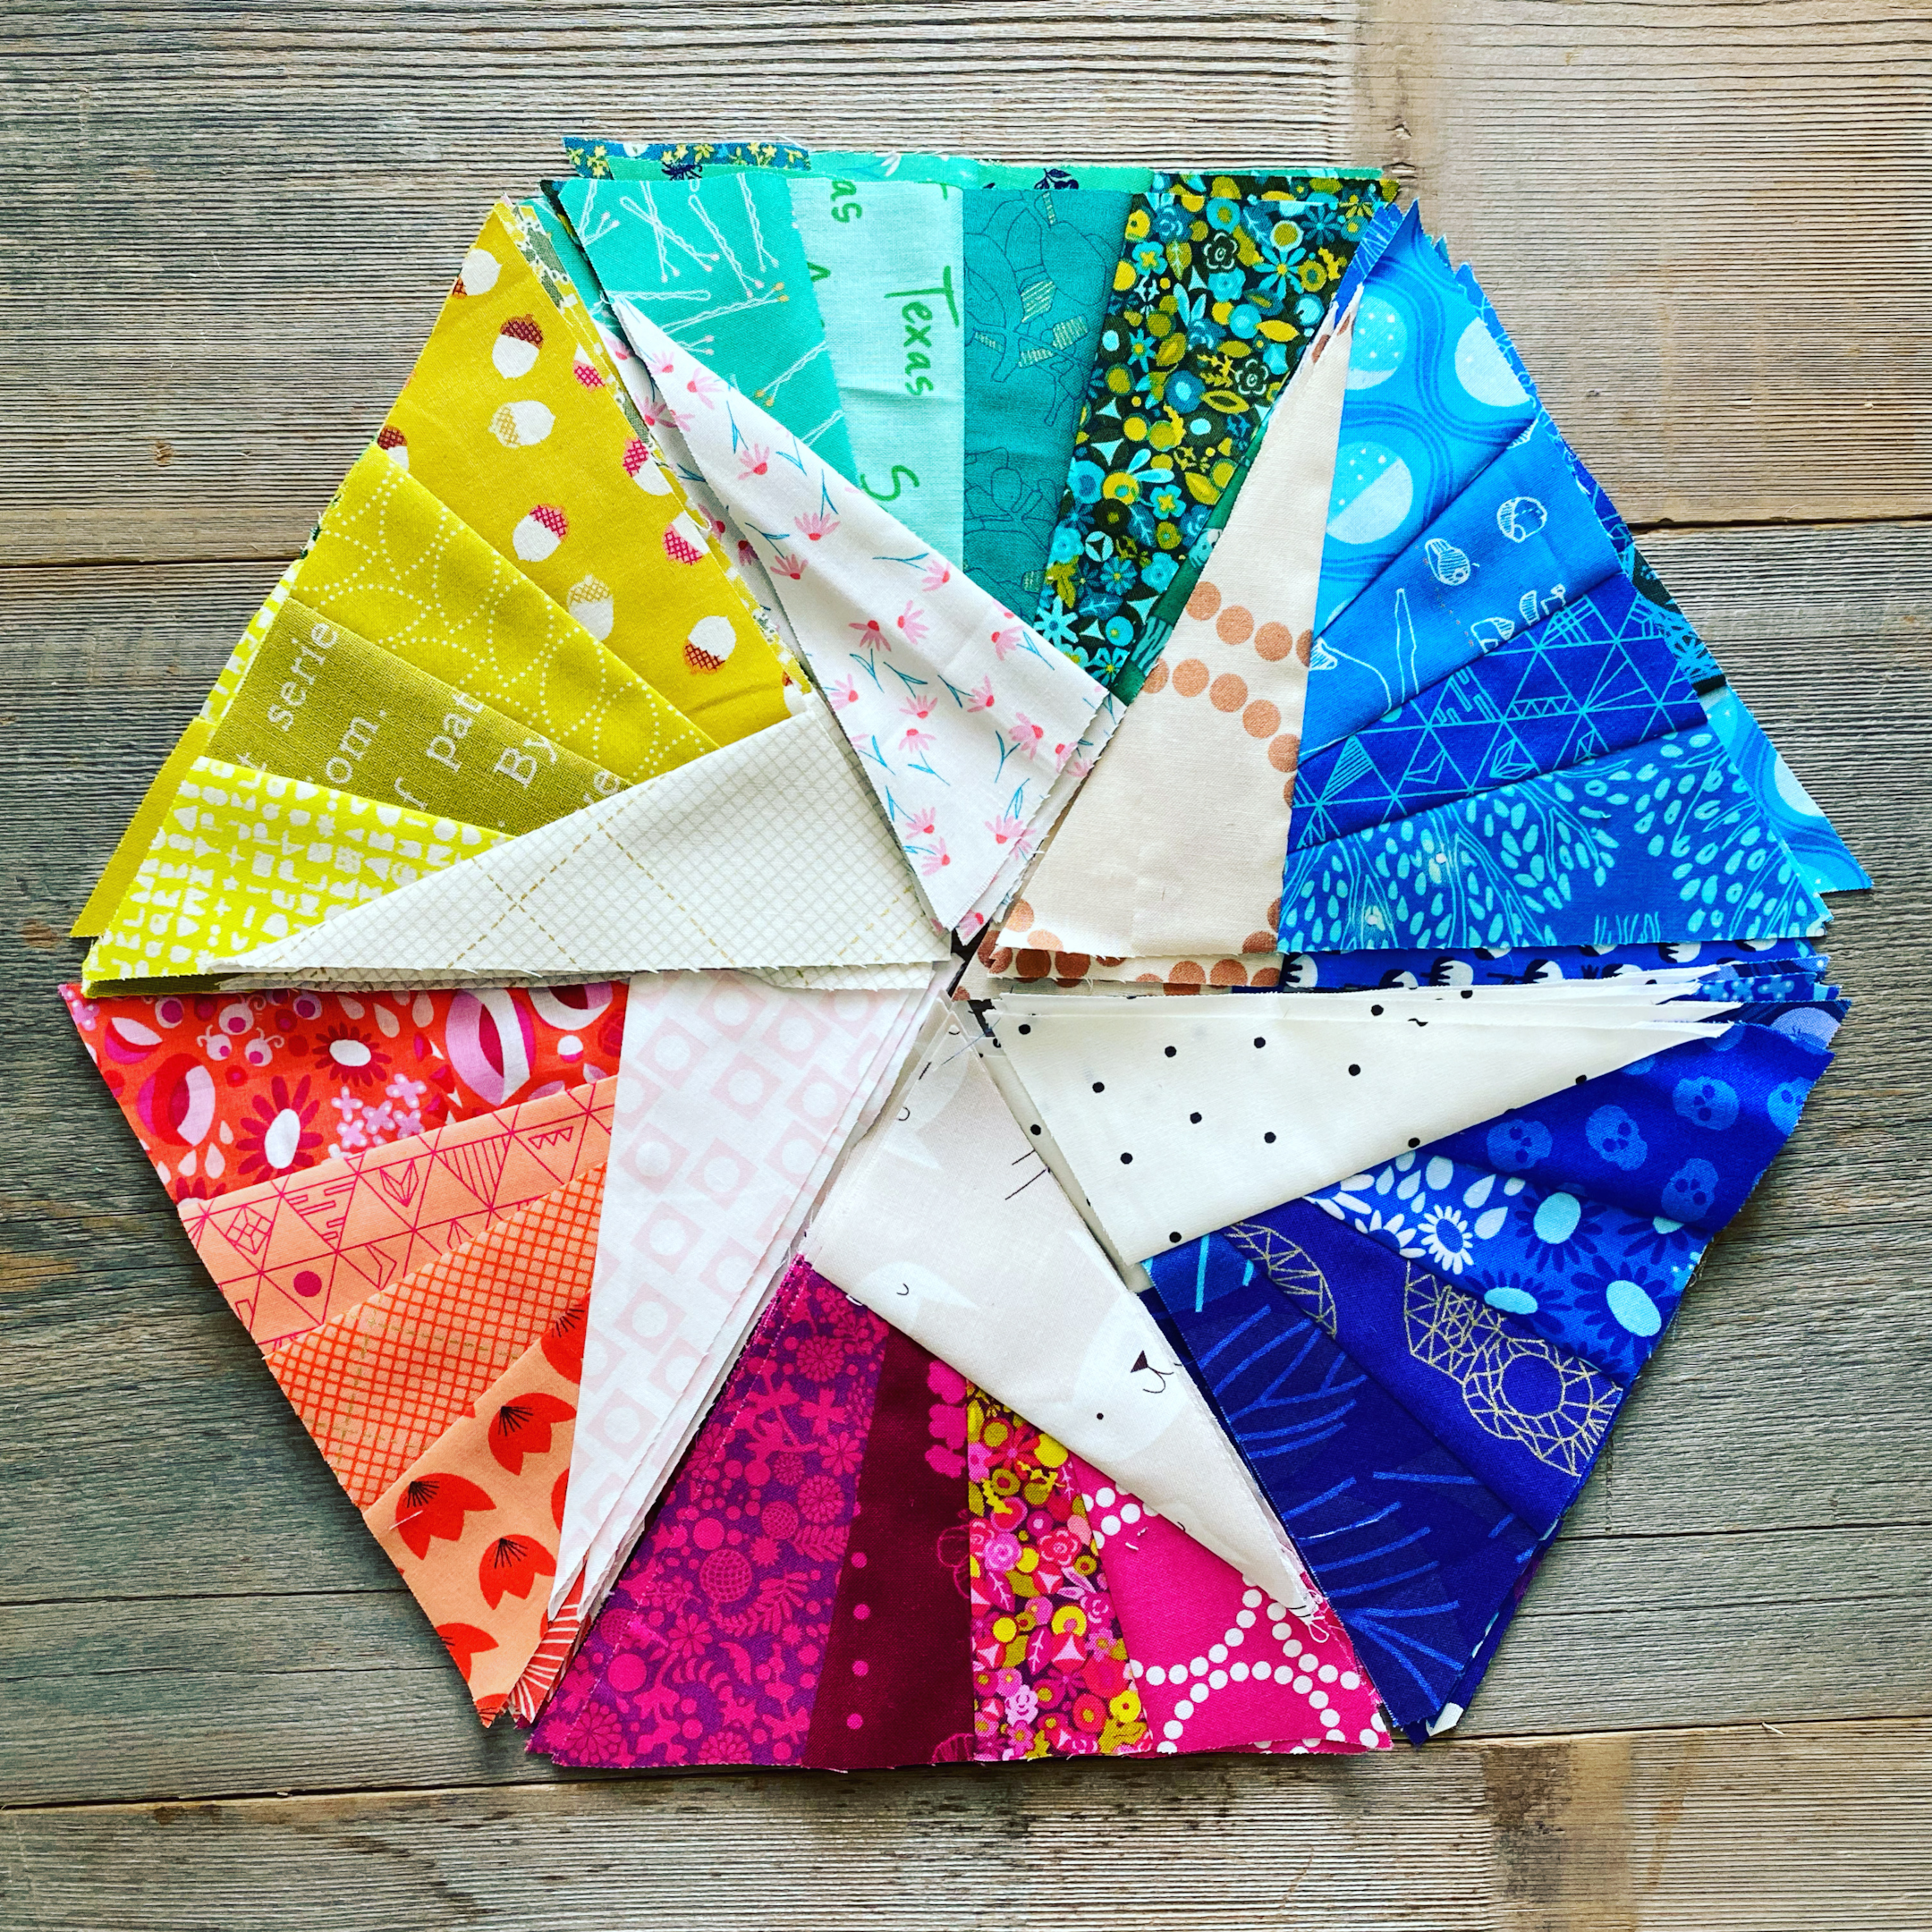 Image shows the Scrappy Whirligig, one of our free quilt patterns